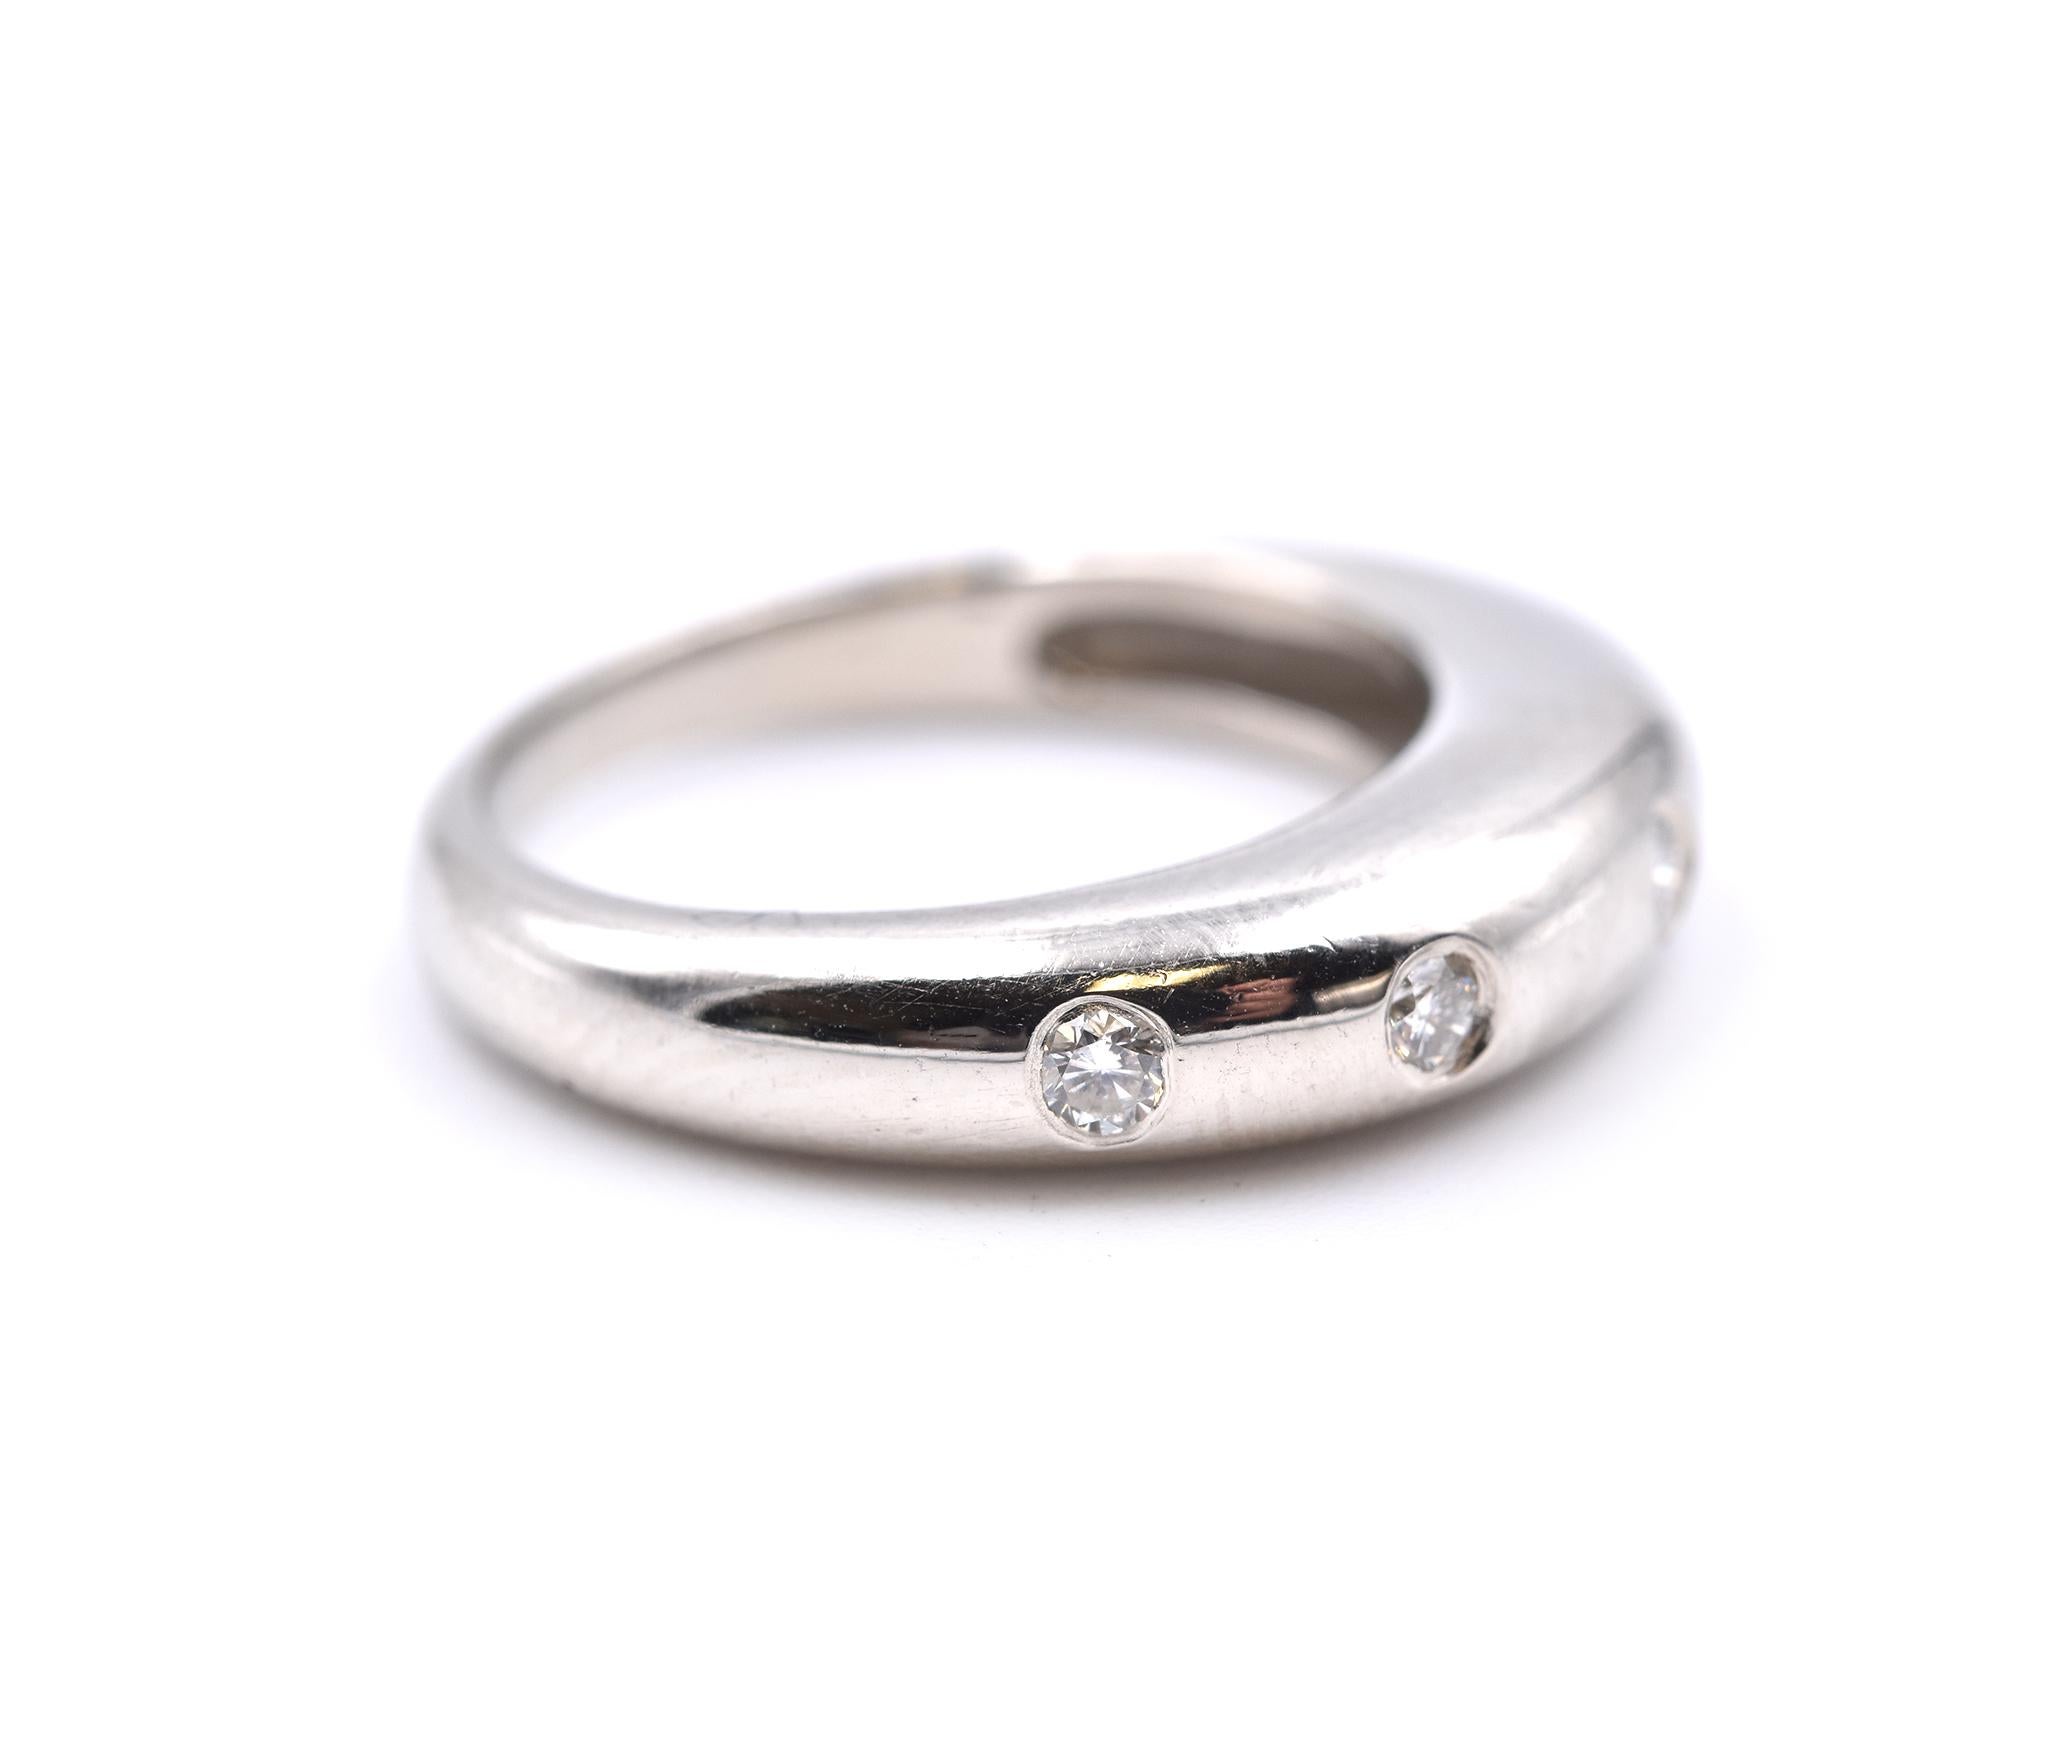 Material: 14K white gold 
Diamonds: 5 round brilliant cut = .25cttw
Color: H
Clarity: SI1
Ring Size: 5 (please allow up to 2 additional business days for sizing requests)
Dimensions: ring measures 4.6mm wide
Weight: 4.77 grams
